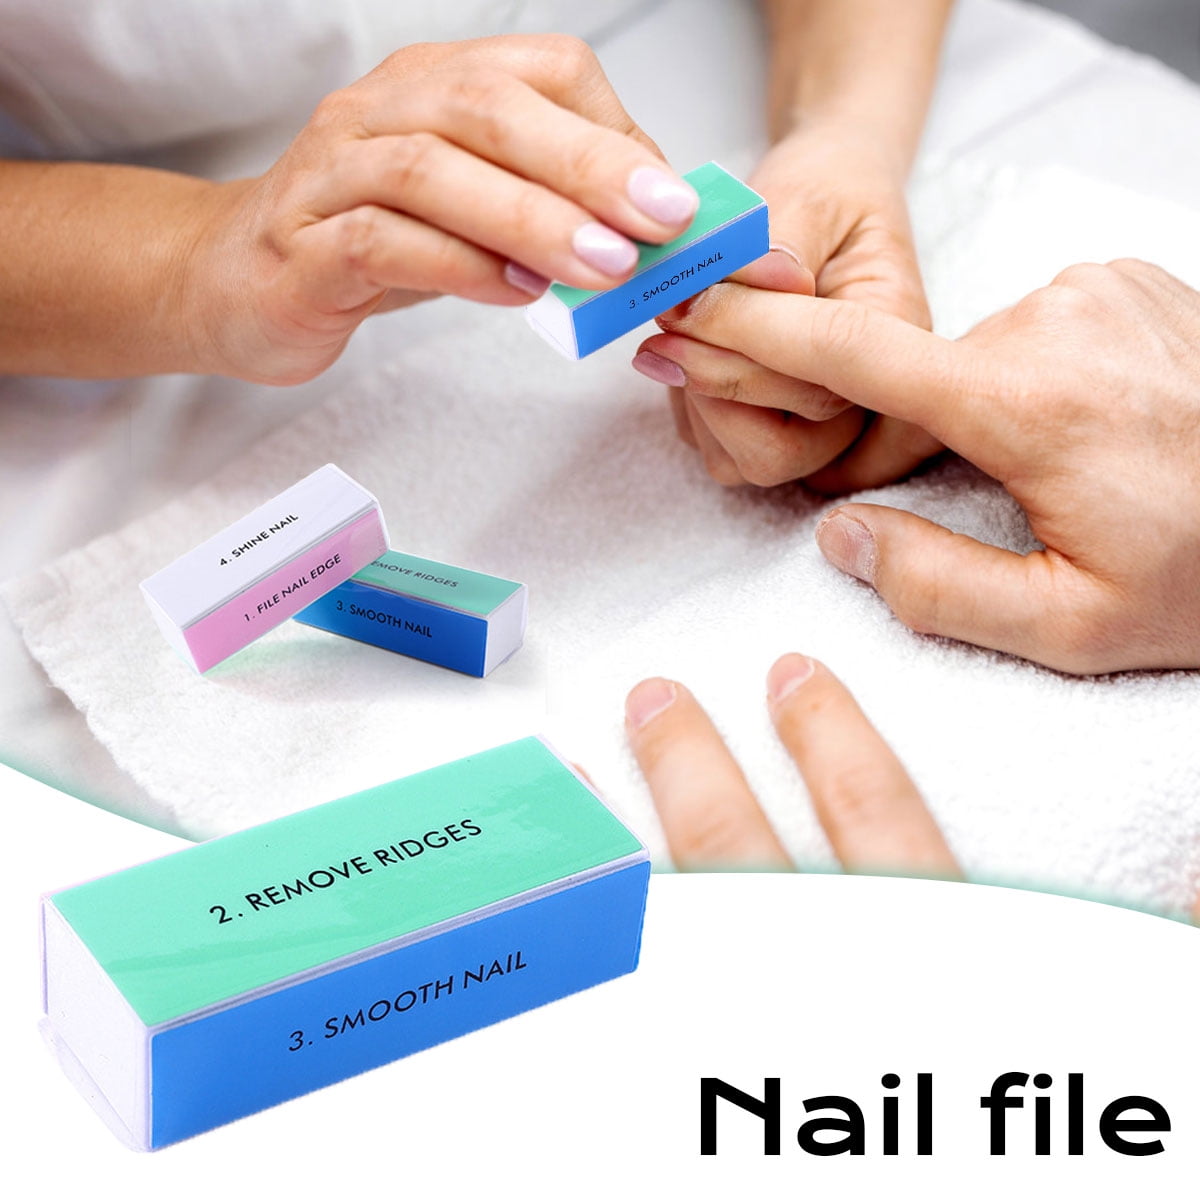 Nail Files Block Sanding Buffer,MTOP Professional Manicure 4 Sided Way Nail  File -4pcs: Buy Online at Best Price in Egypt - Souq is now Amazon.eg